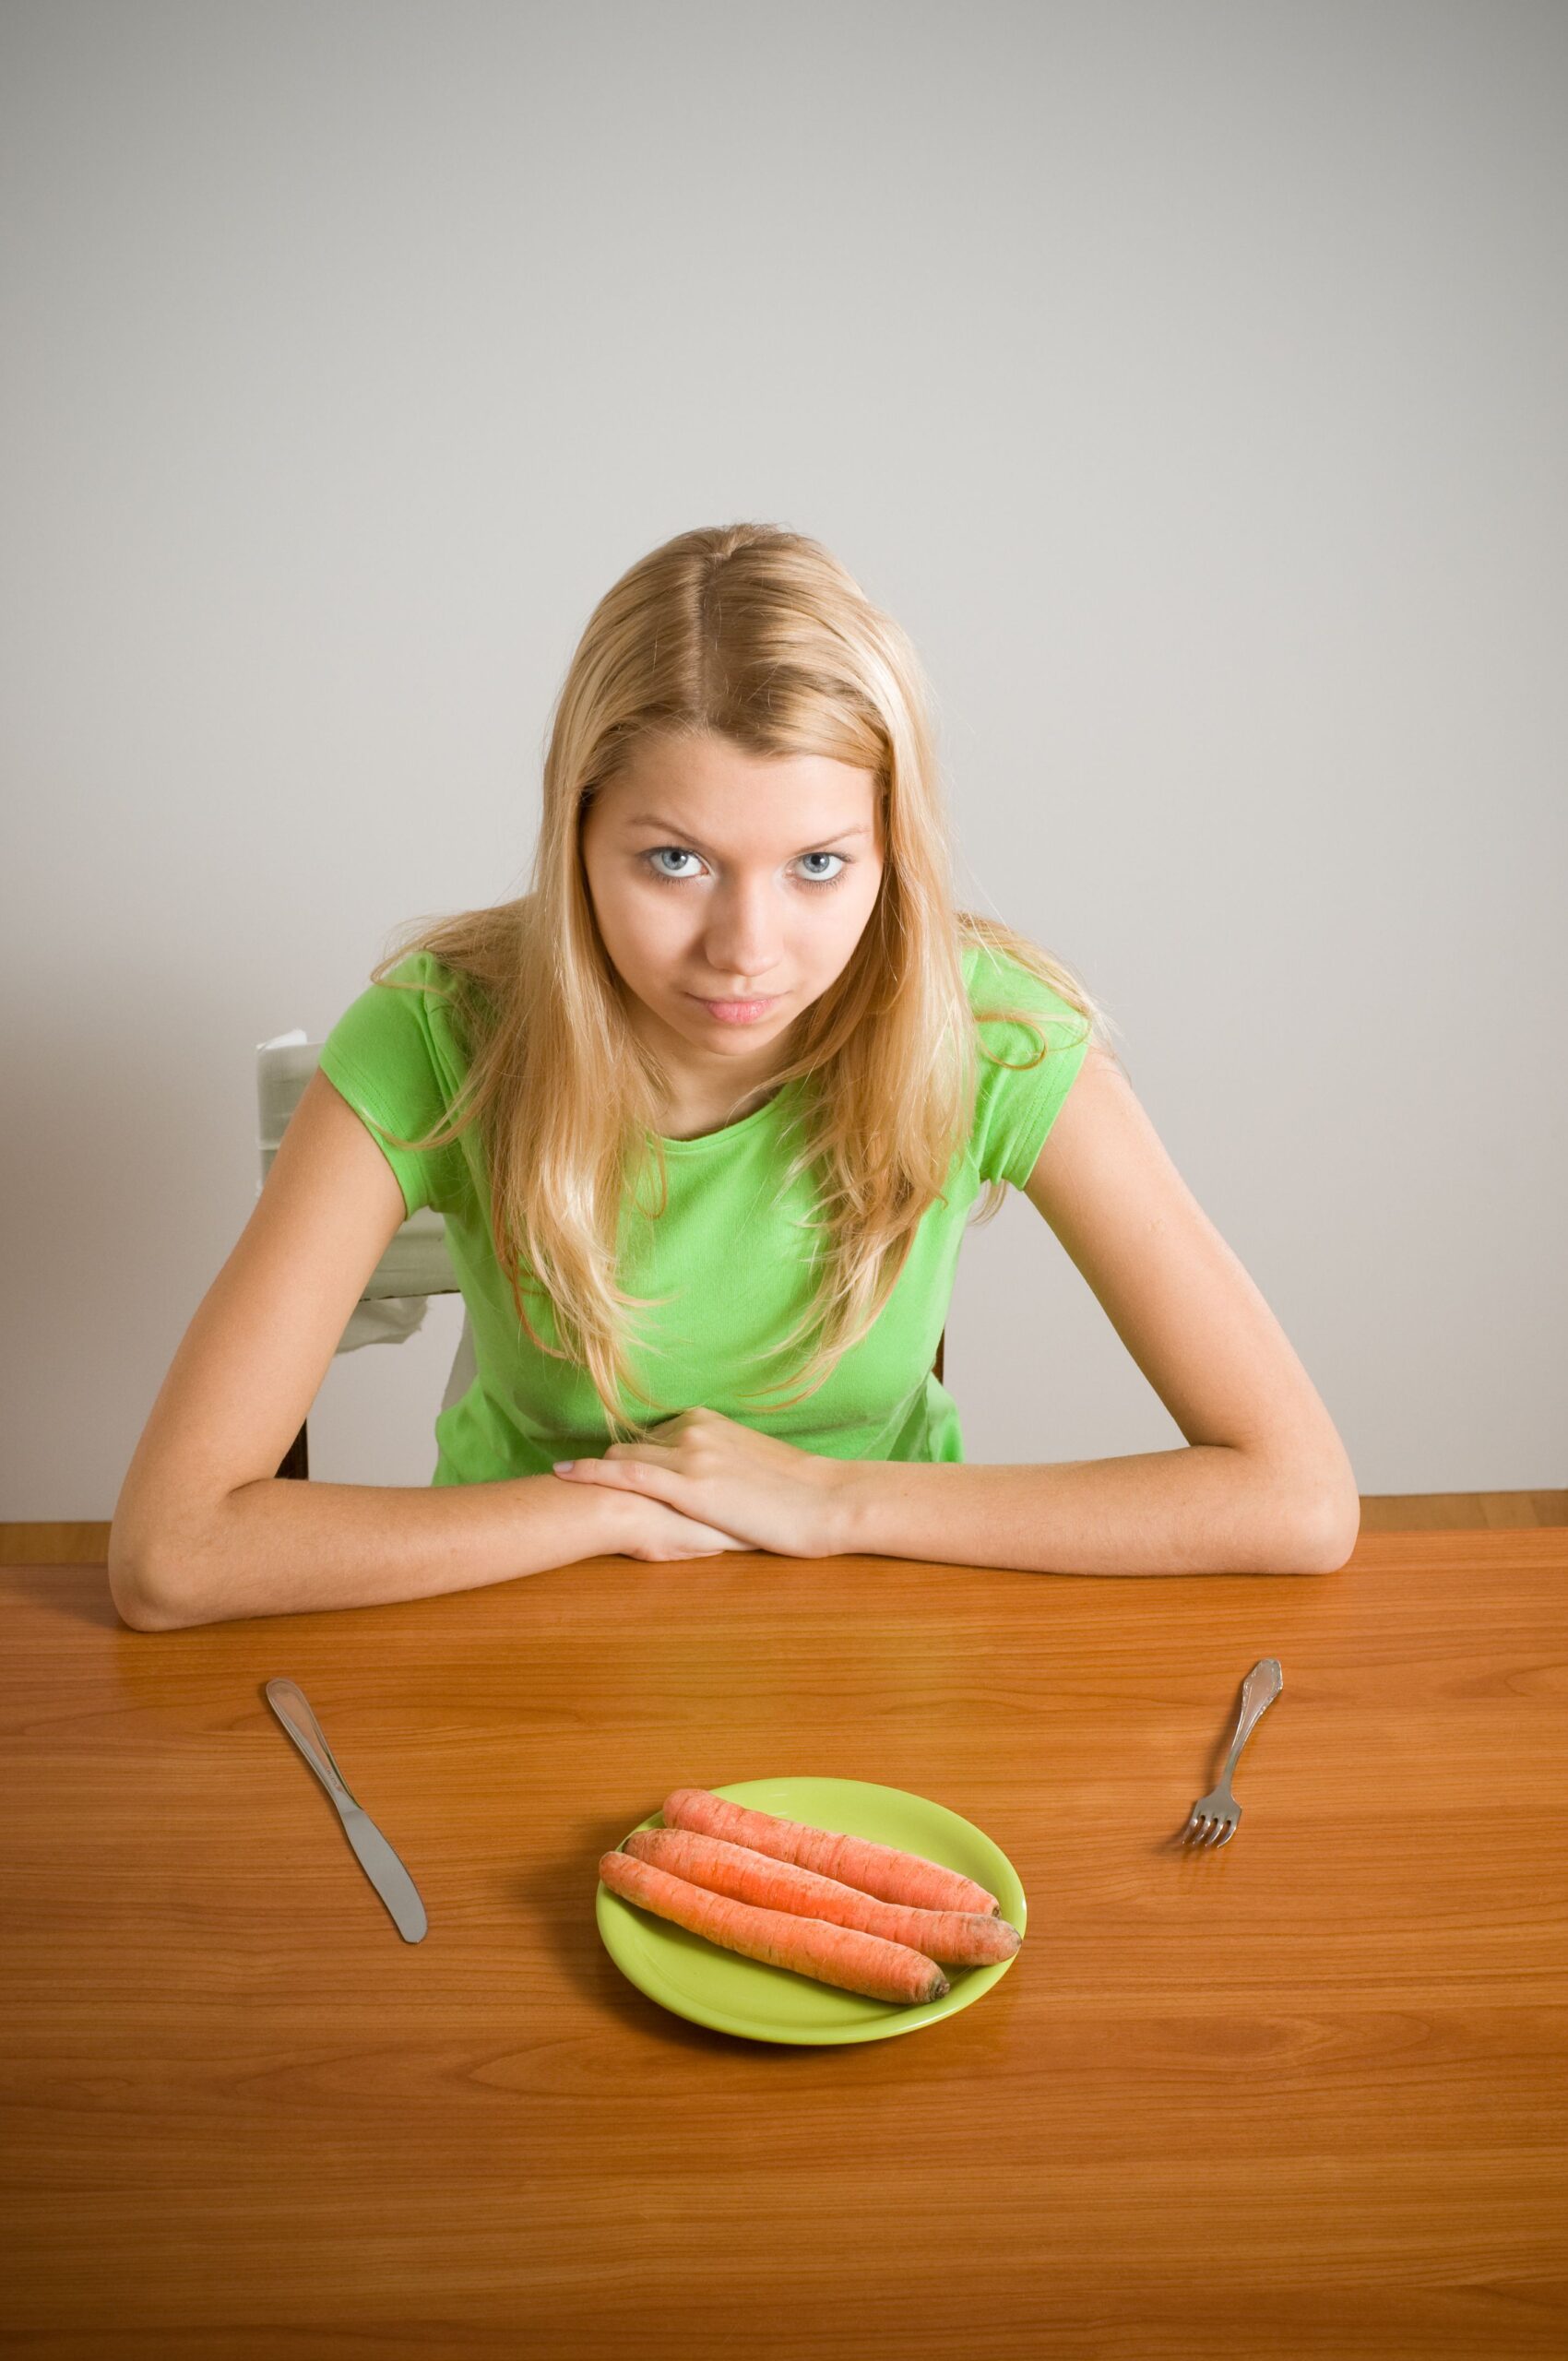 Common Symptoms of Eating Disorders